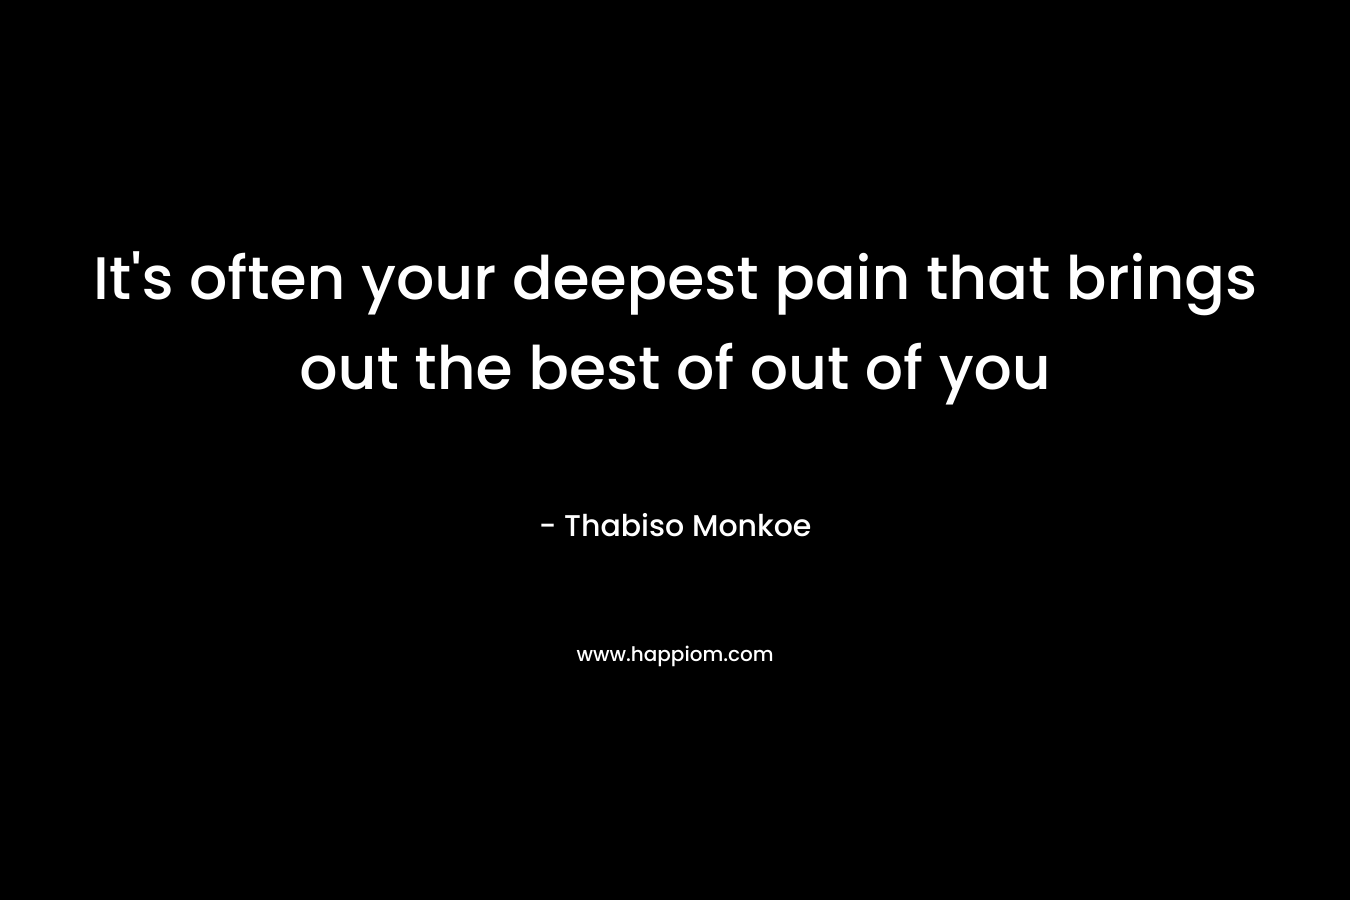 It's often your deepest pain that brings out the best of out of you